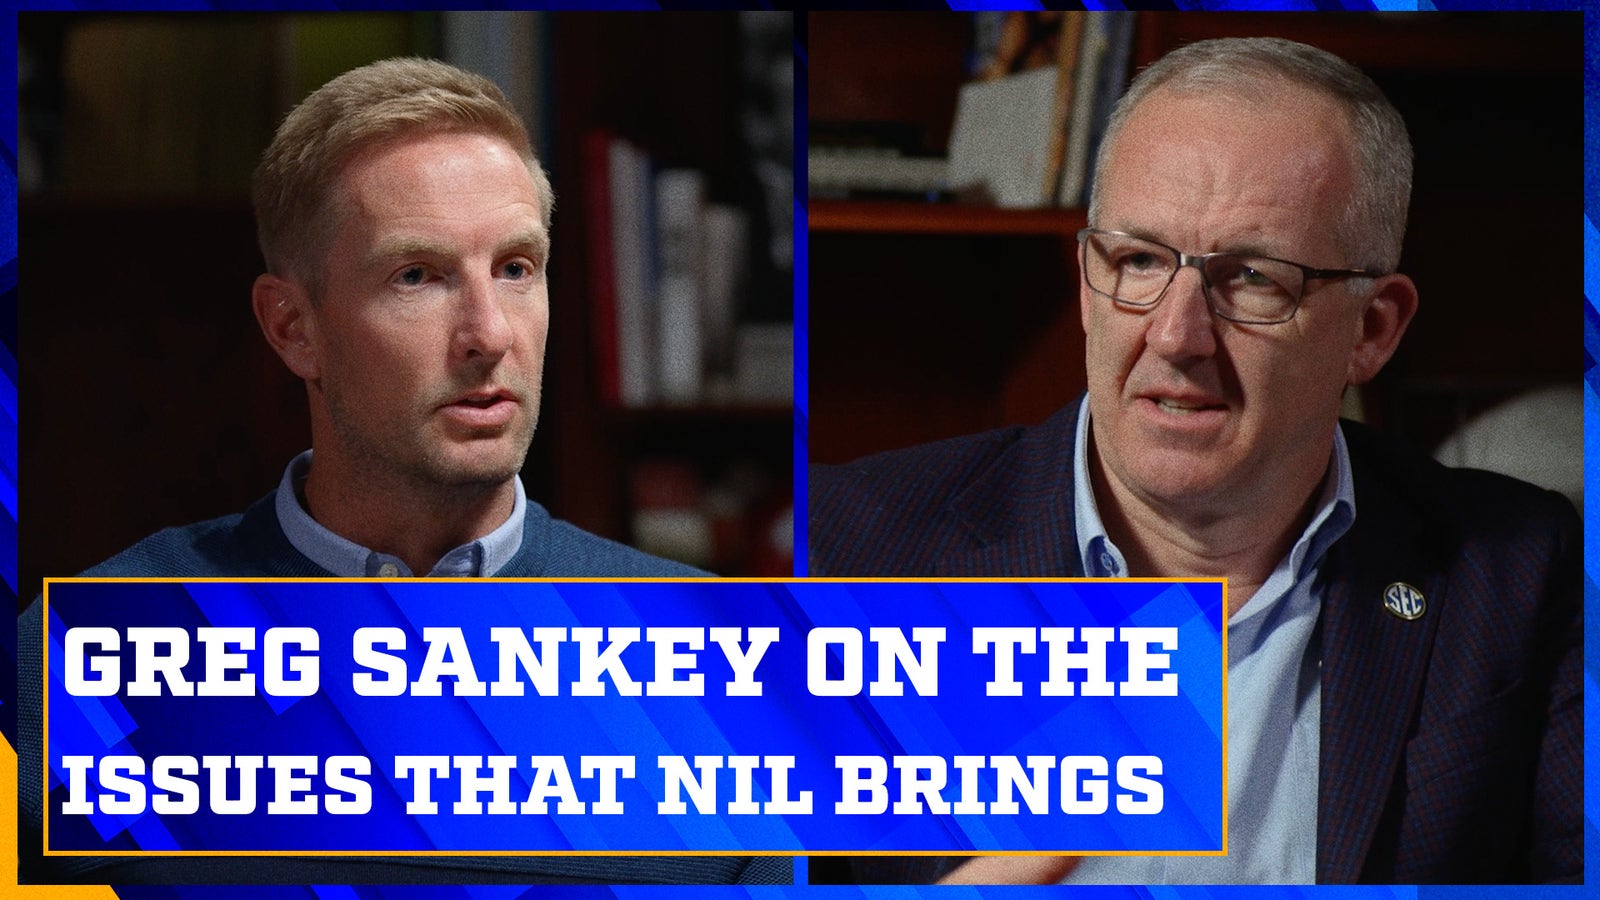 Greg Sankey on NIL and the issues that come with it